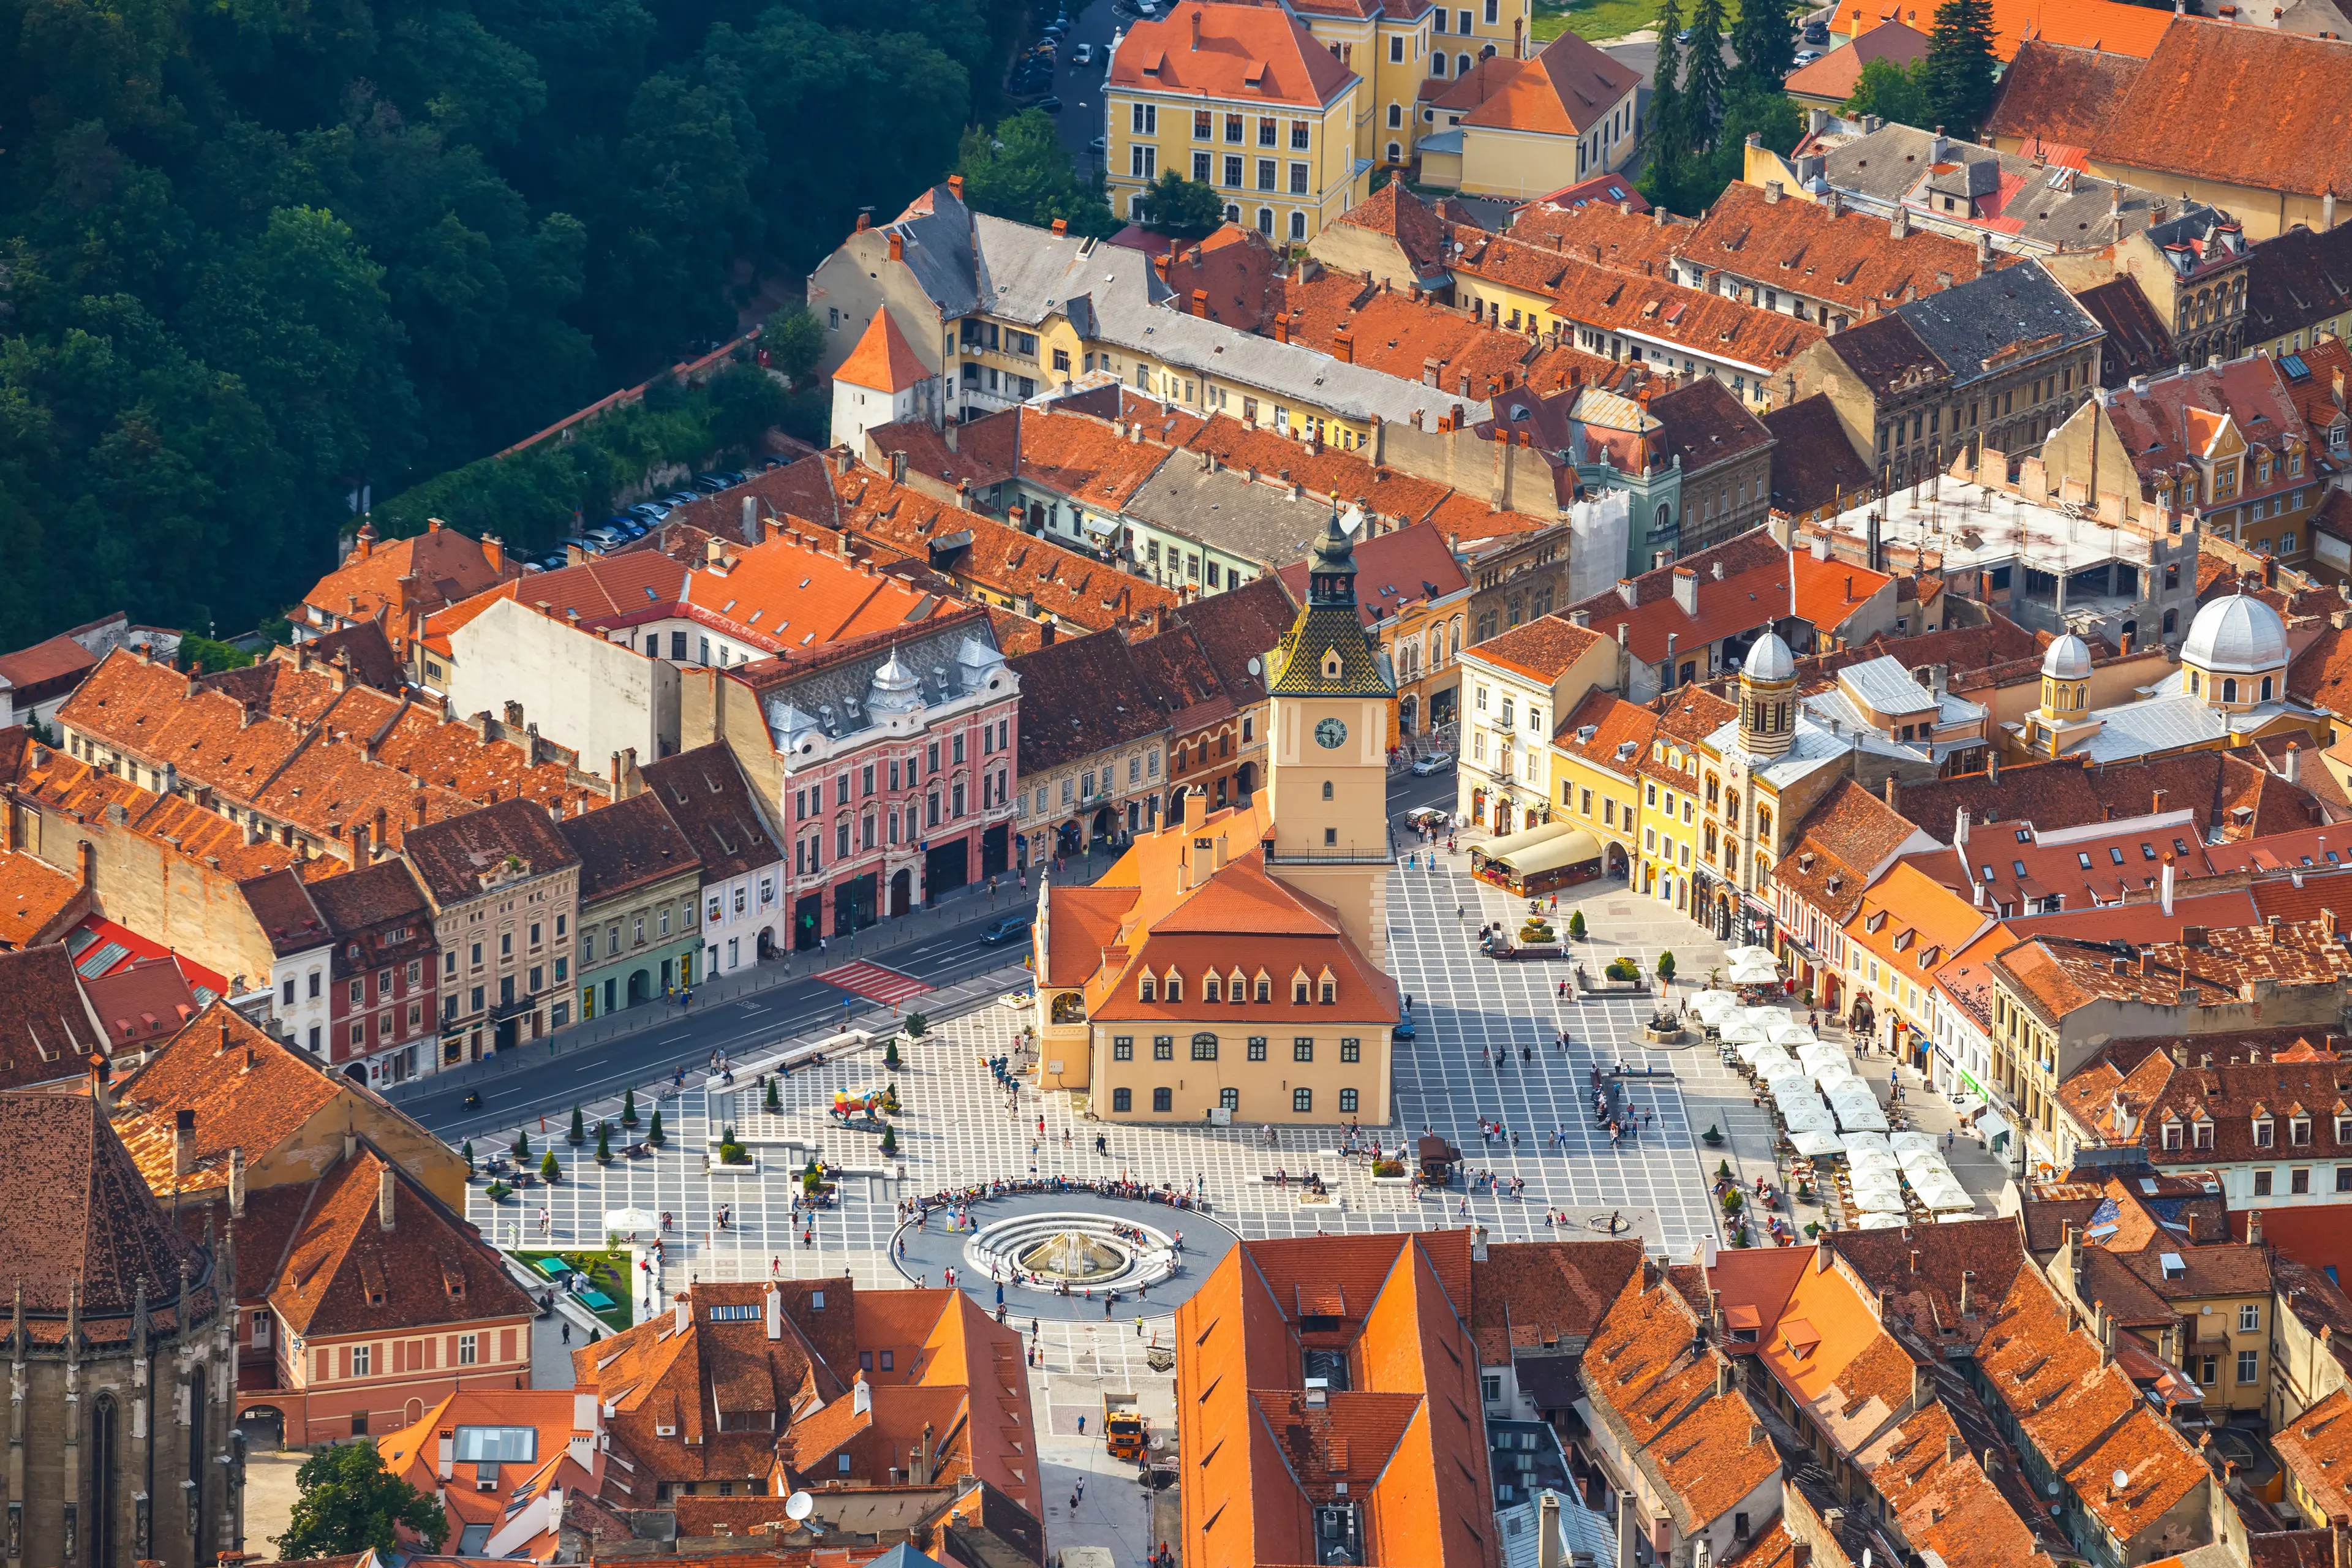 Brasov, Romania: An Engaging One-Day Travel Itinerary